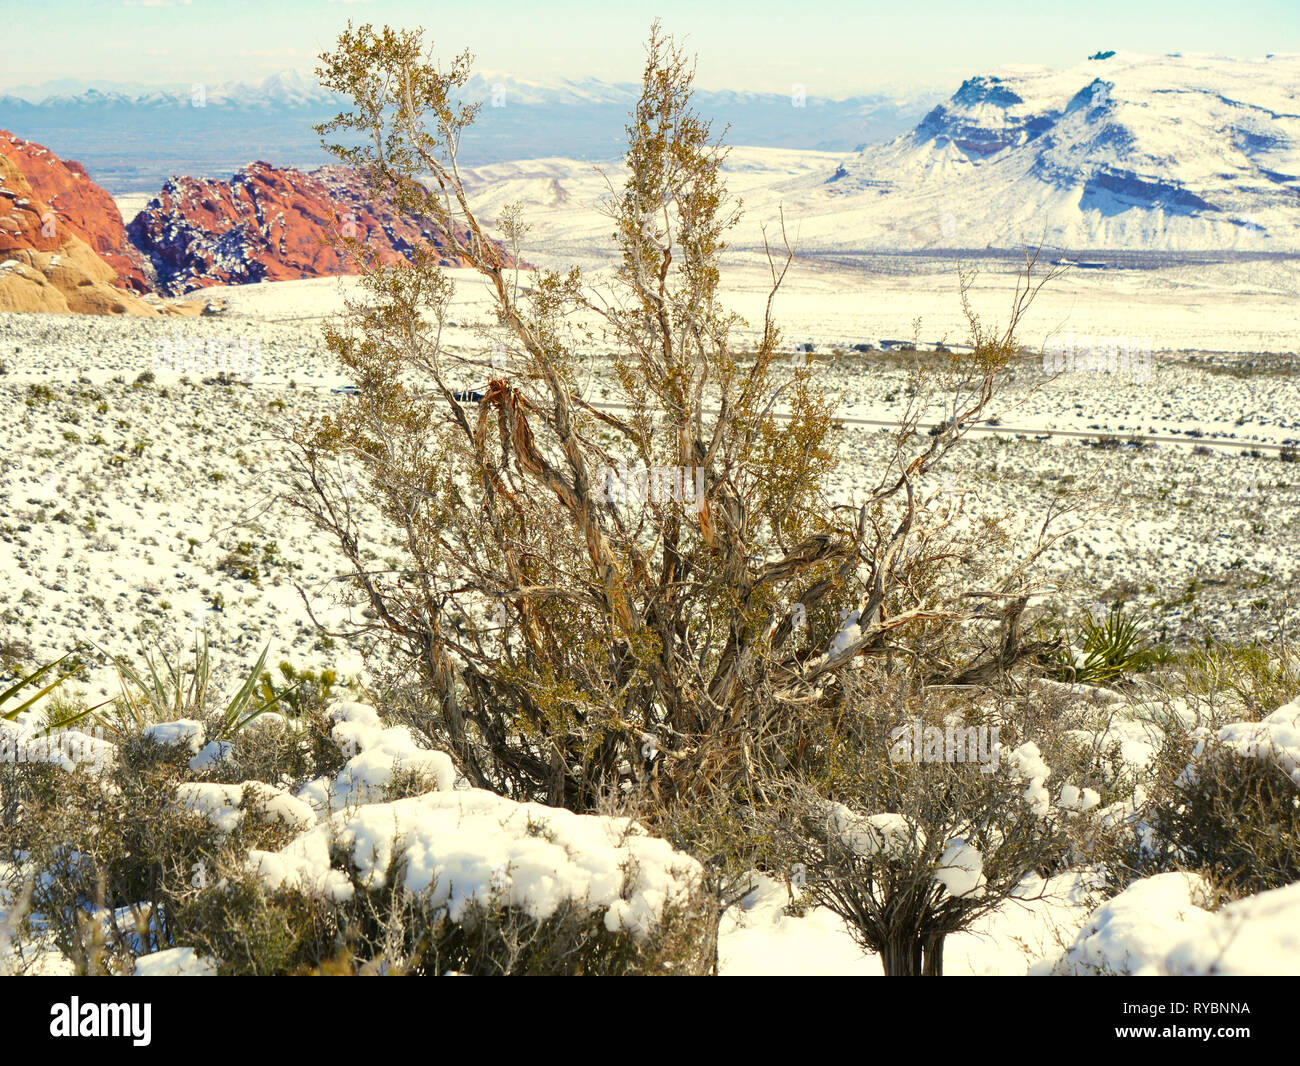 Snow on desert plants and hills in Red Rock Canyon near Las Vegas Stock Photo